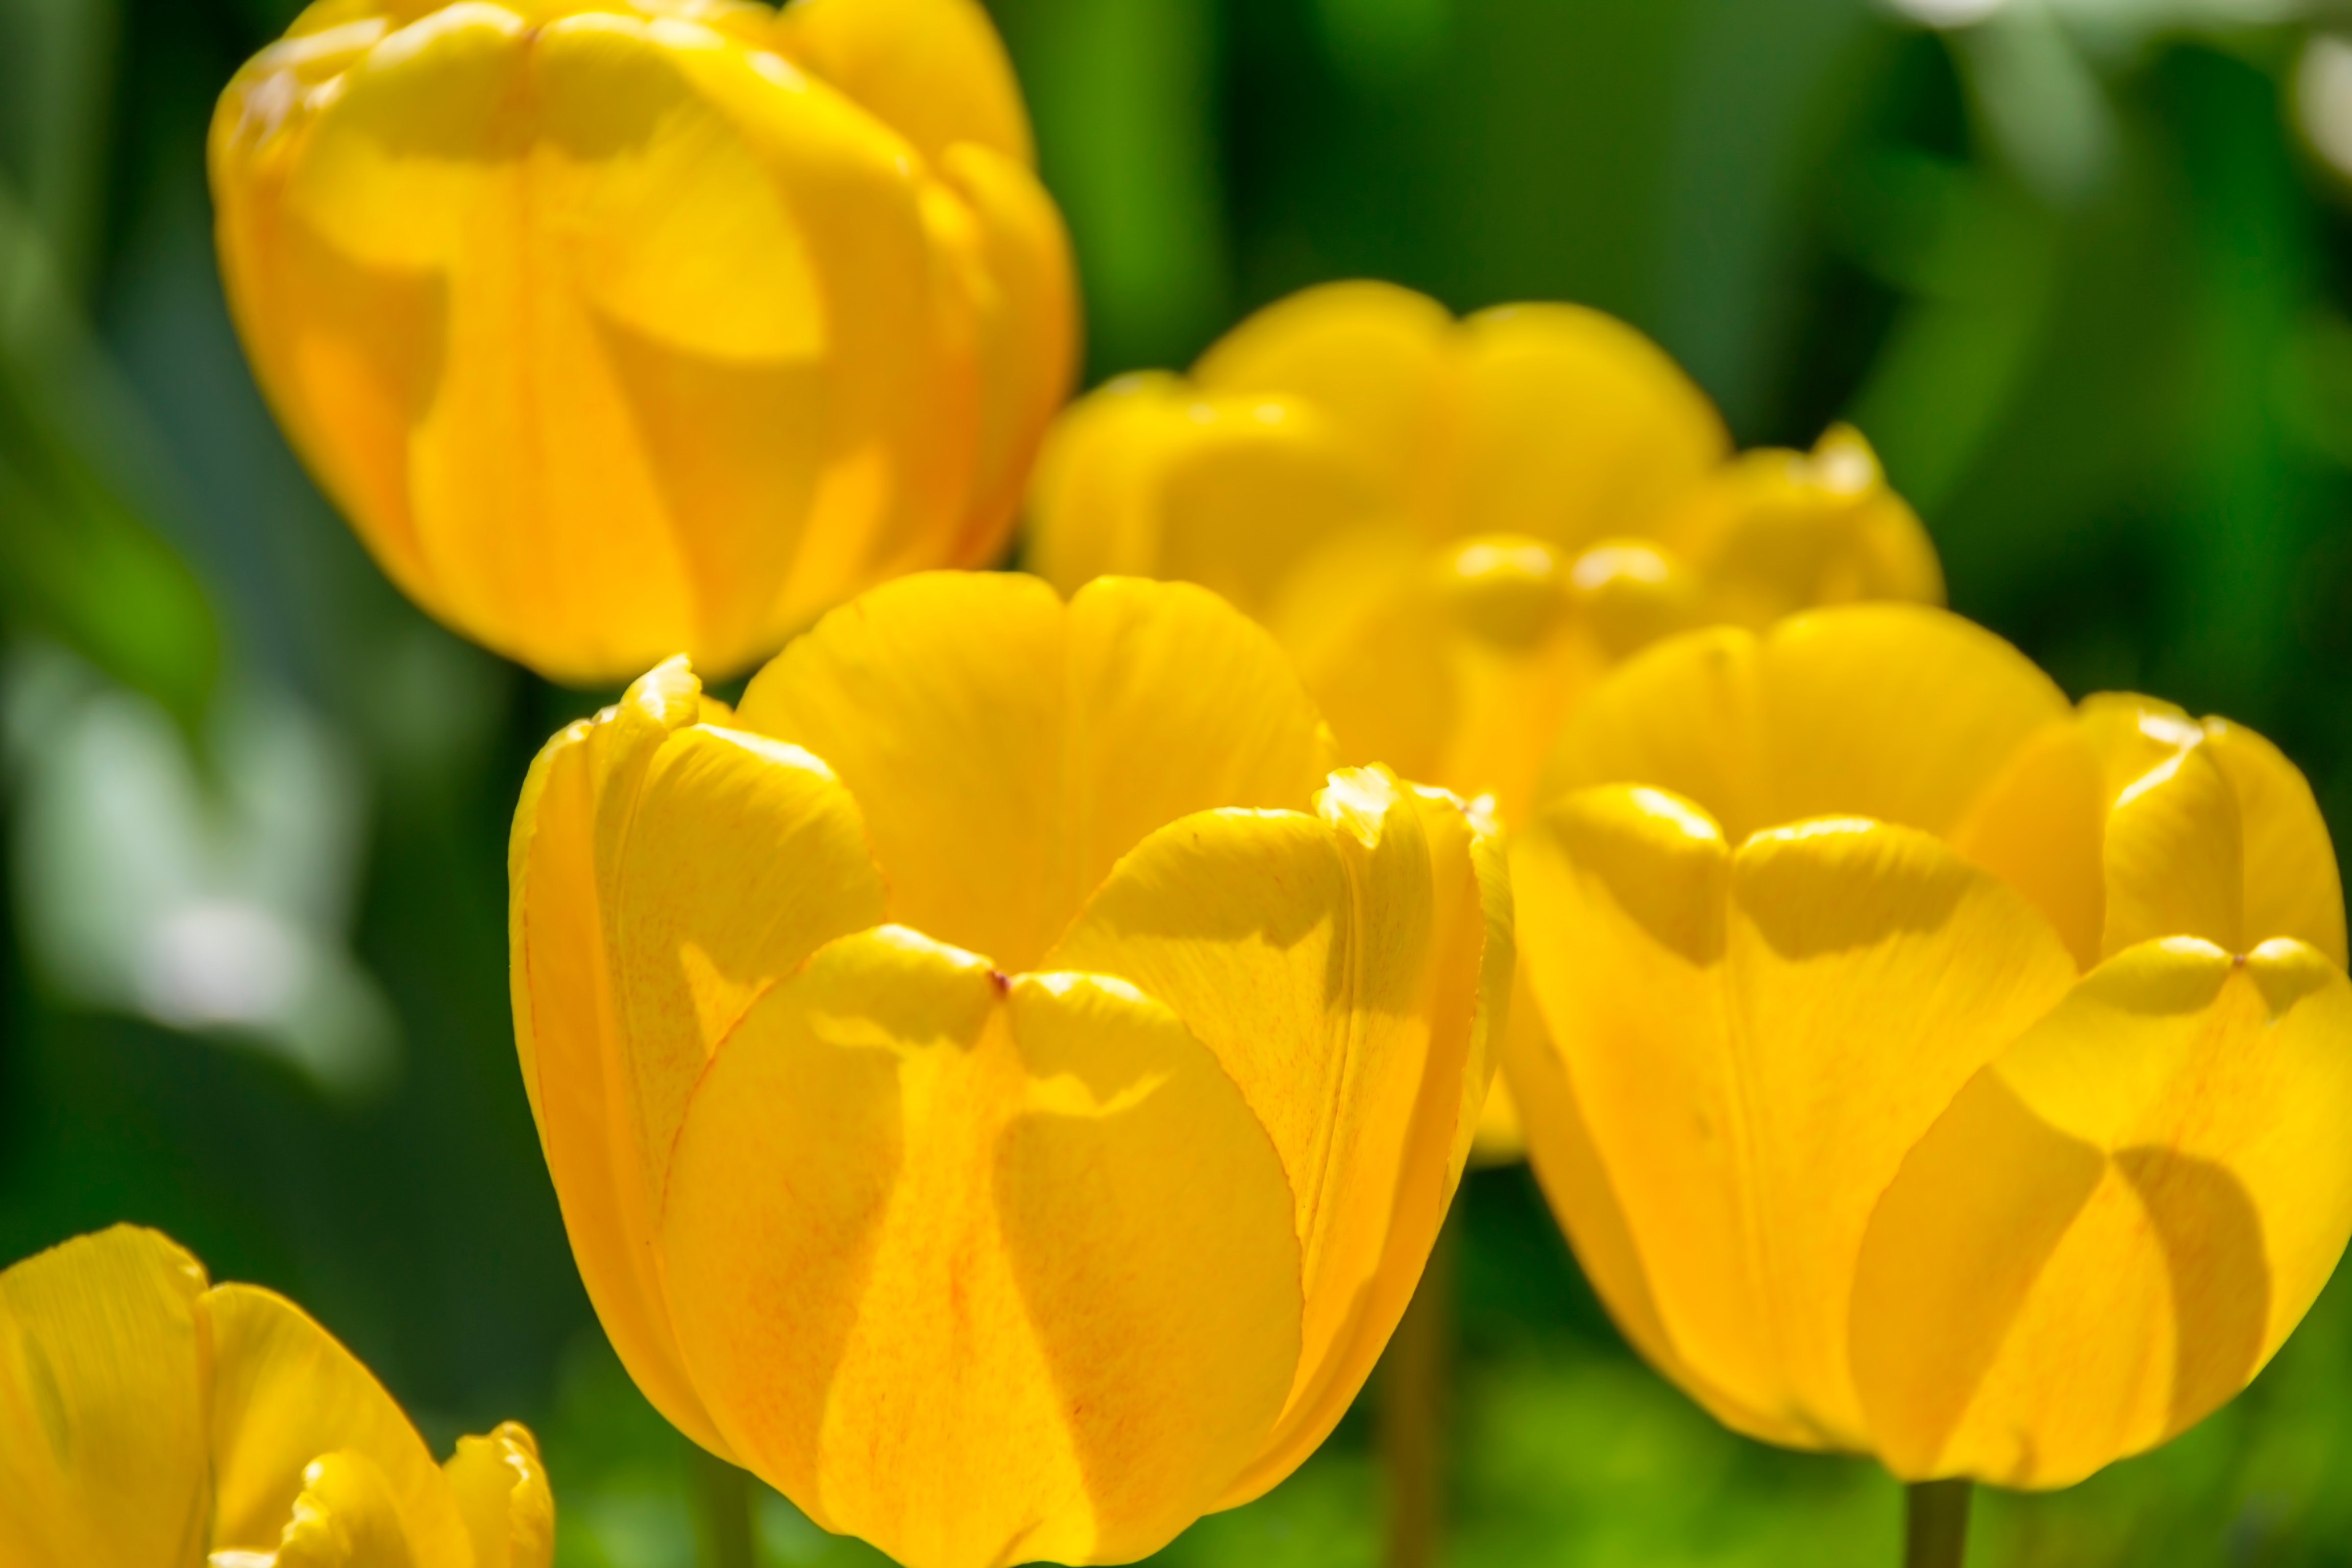 Yellow Tulip Flower Meaning Dictionary | Auntyflo.com